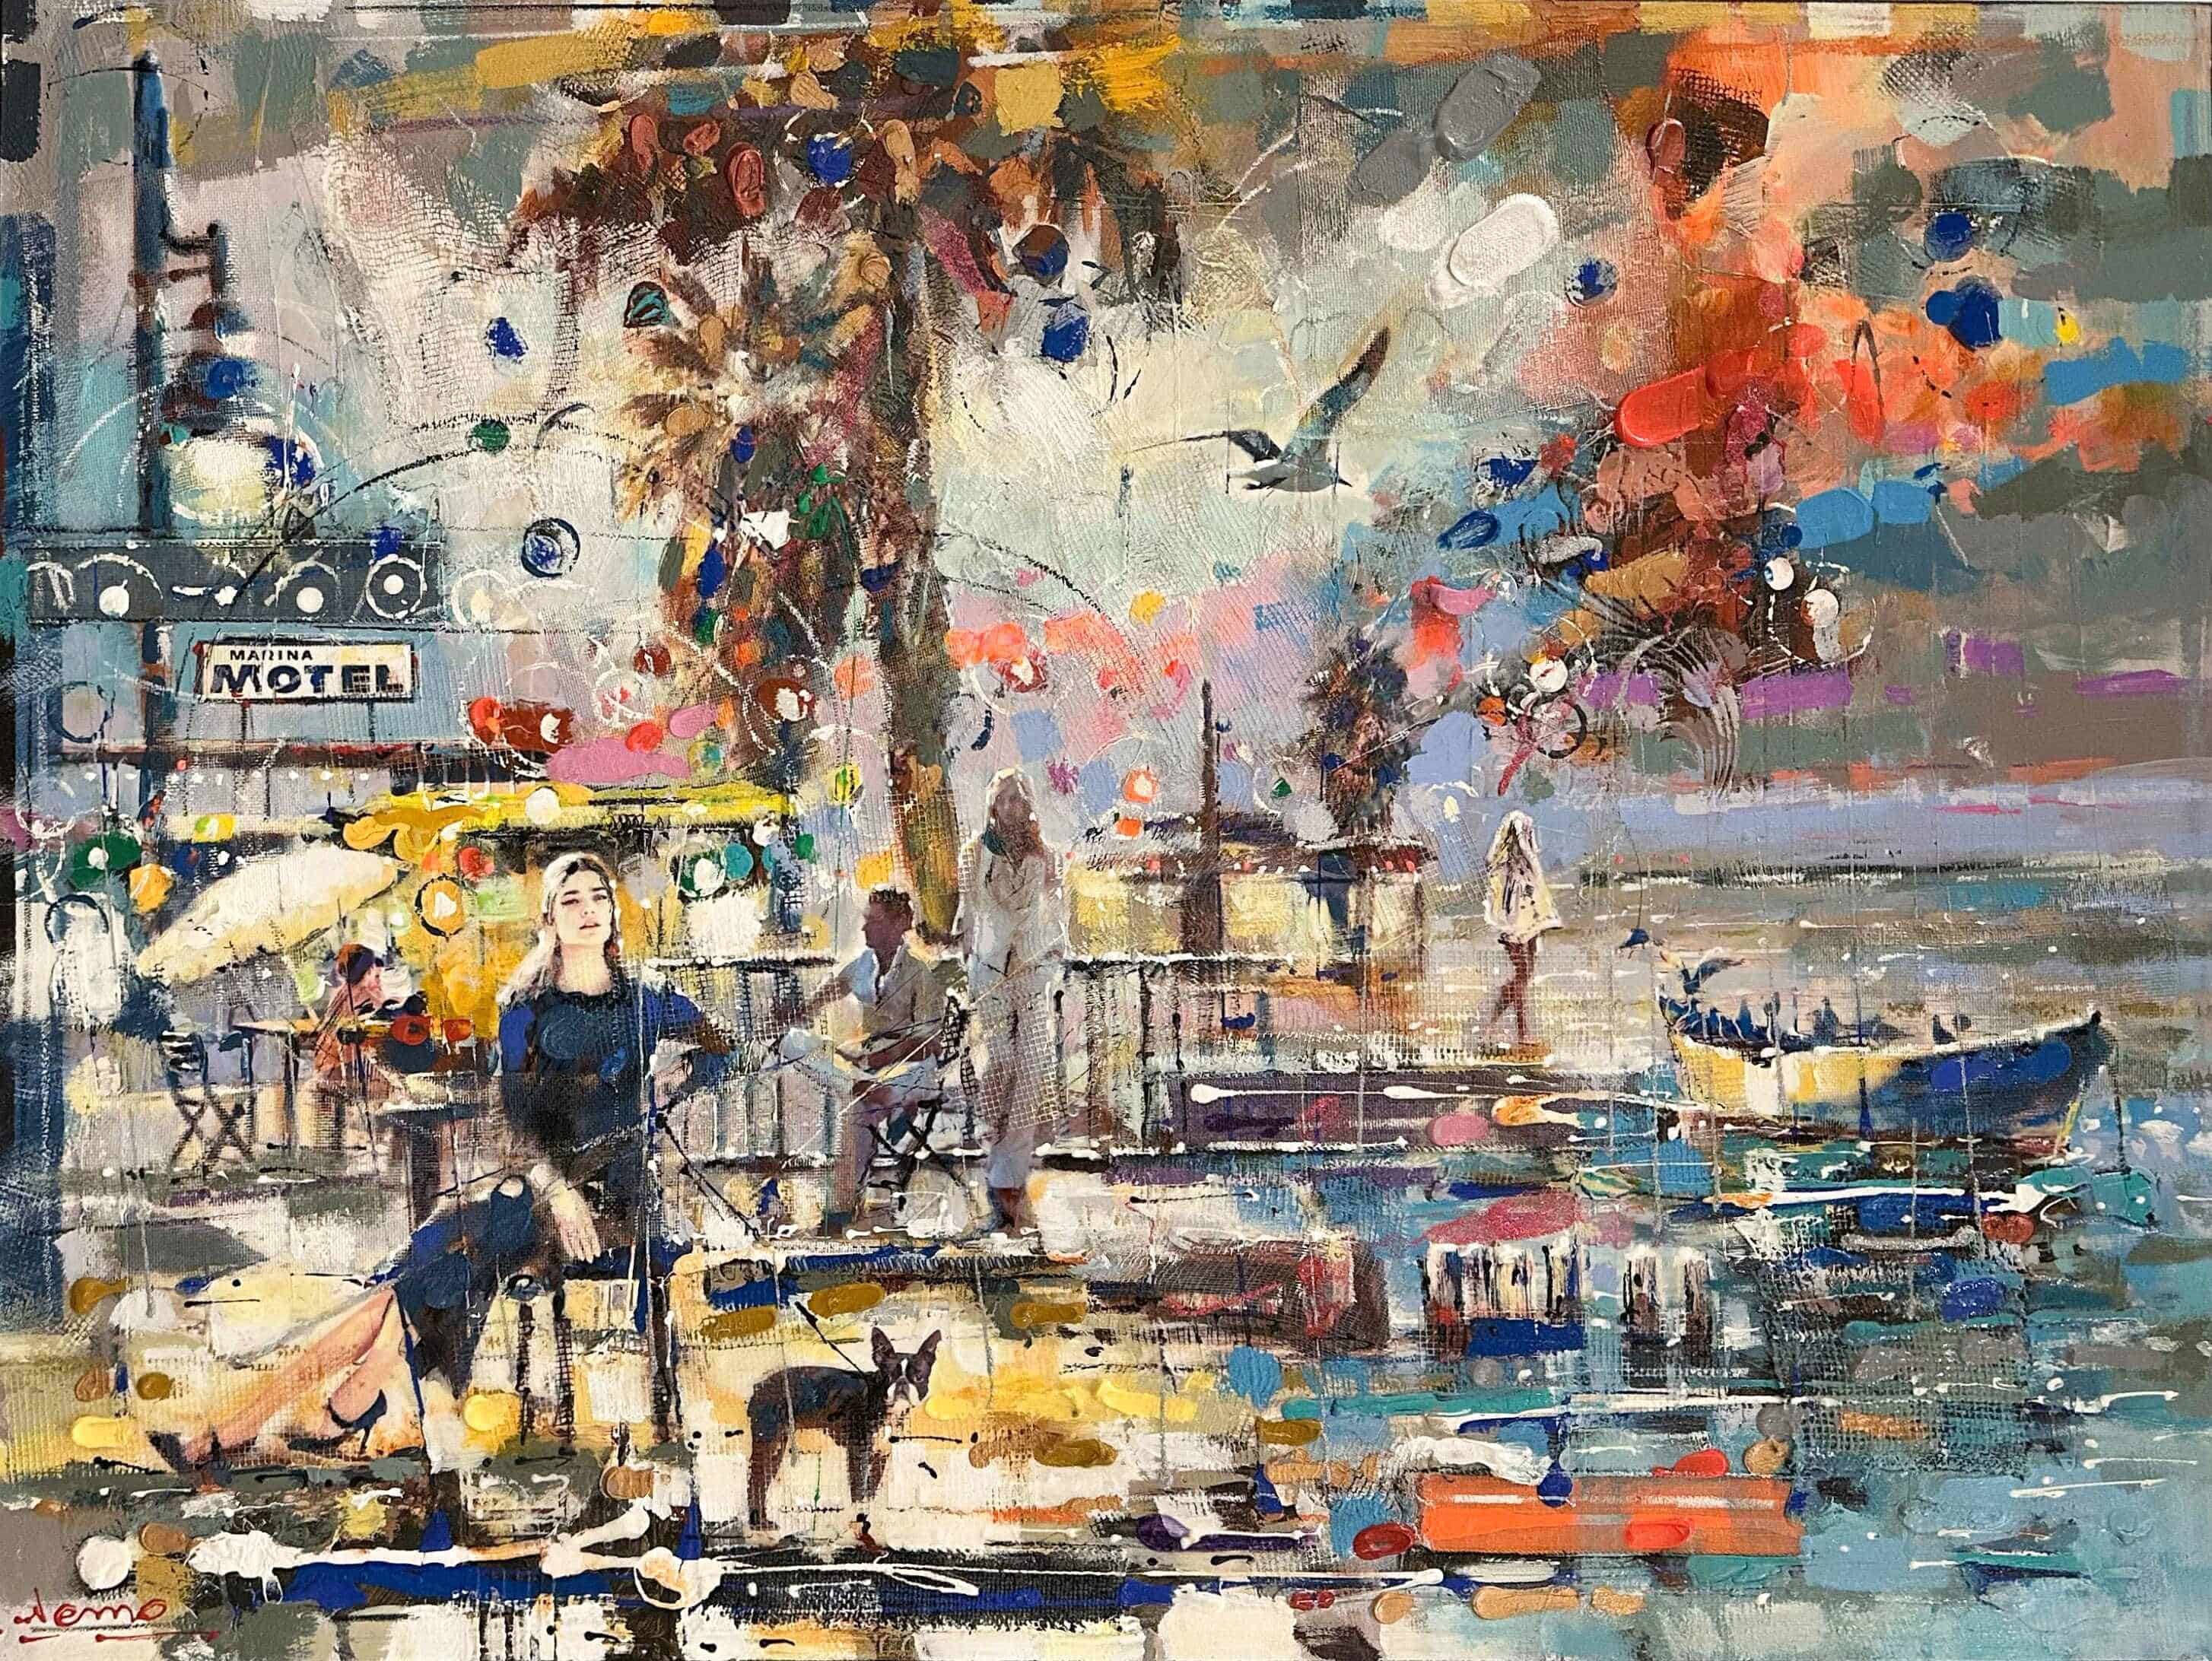 Contemporary art. Title: At Marina Motel, Mixed Media 30x40 inches By Canadian artist Victor Nemo.